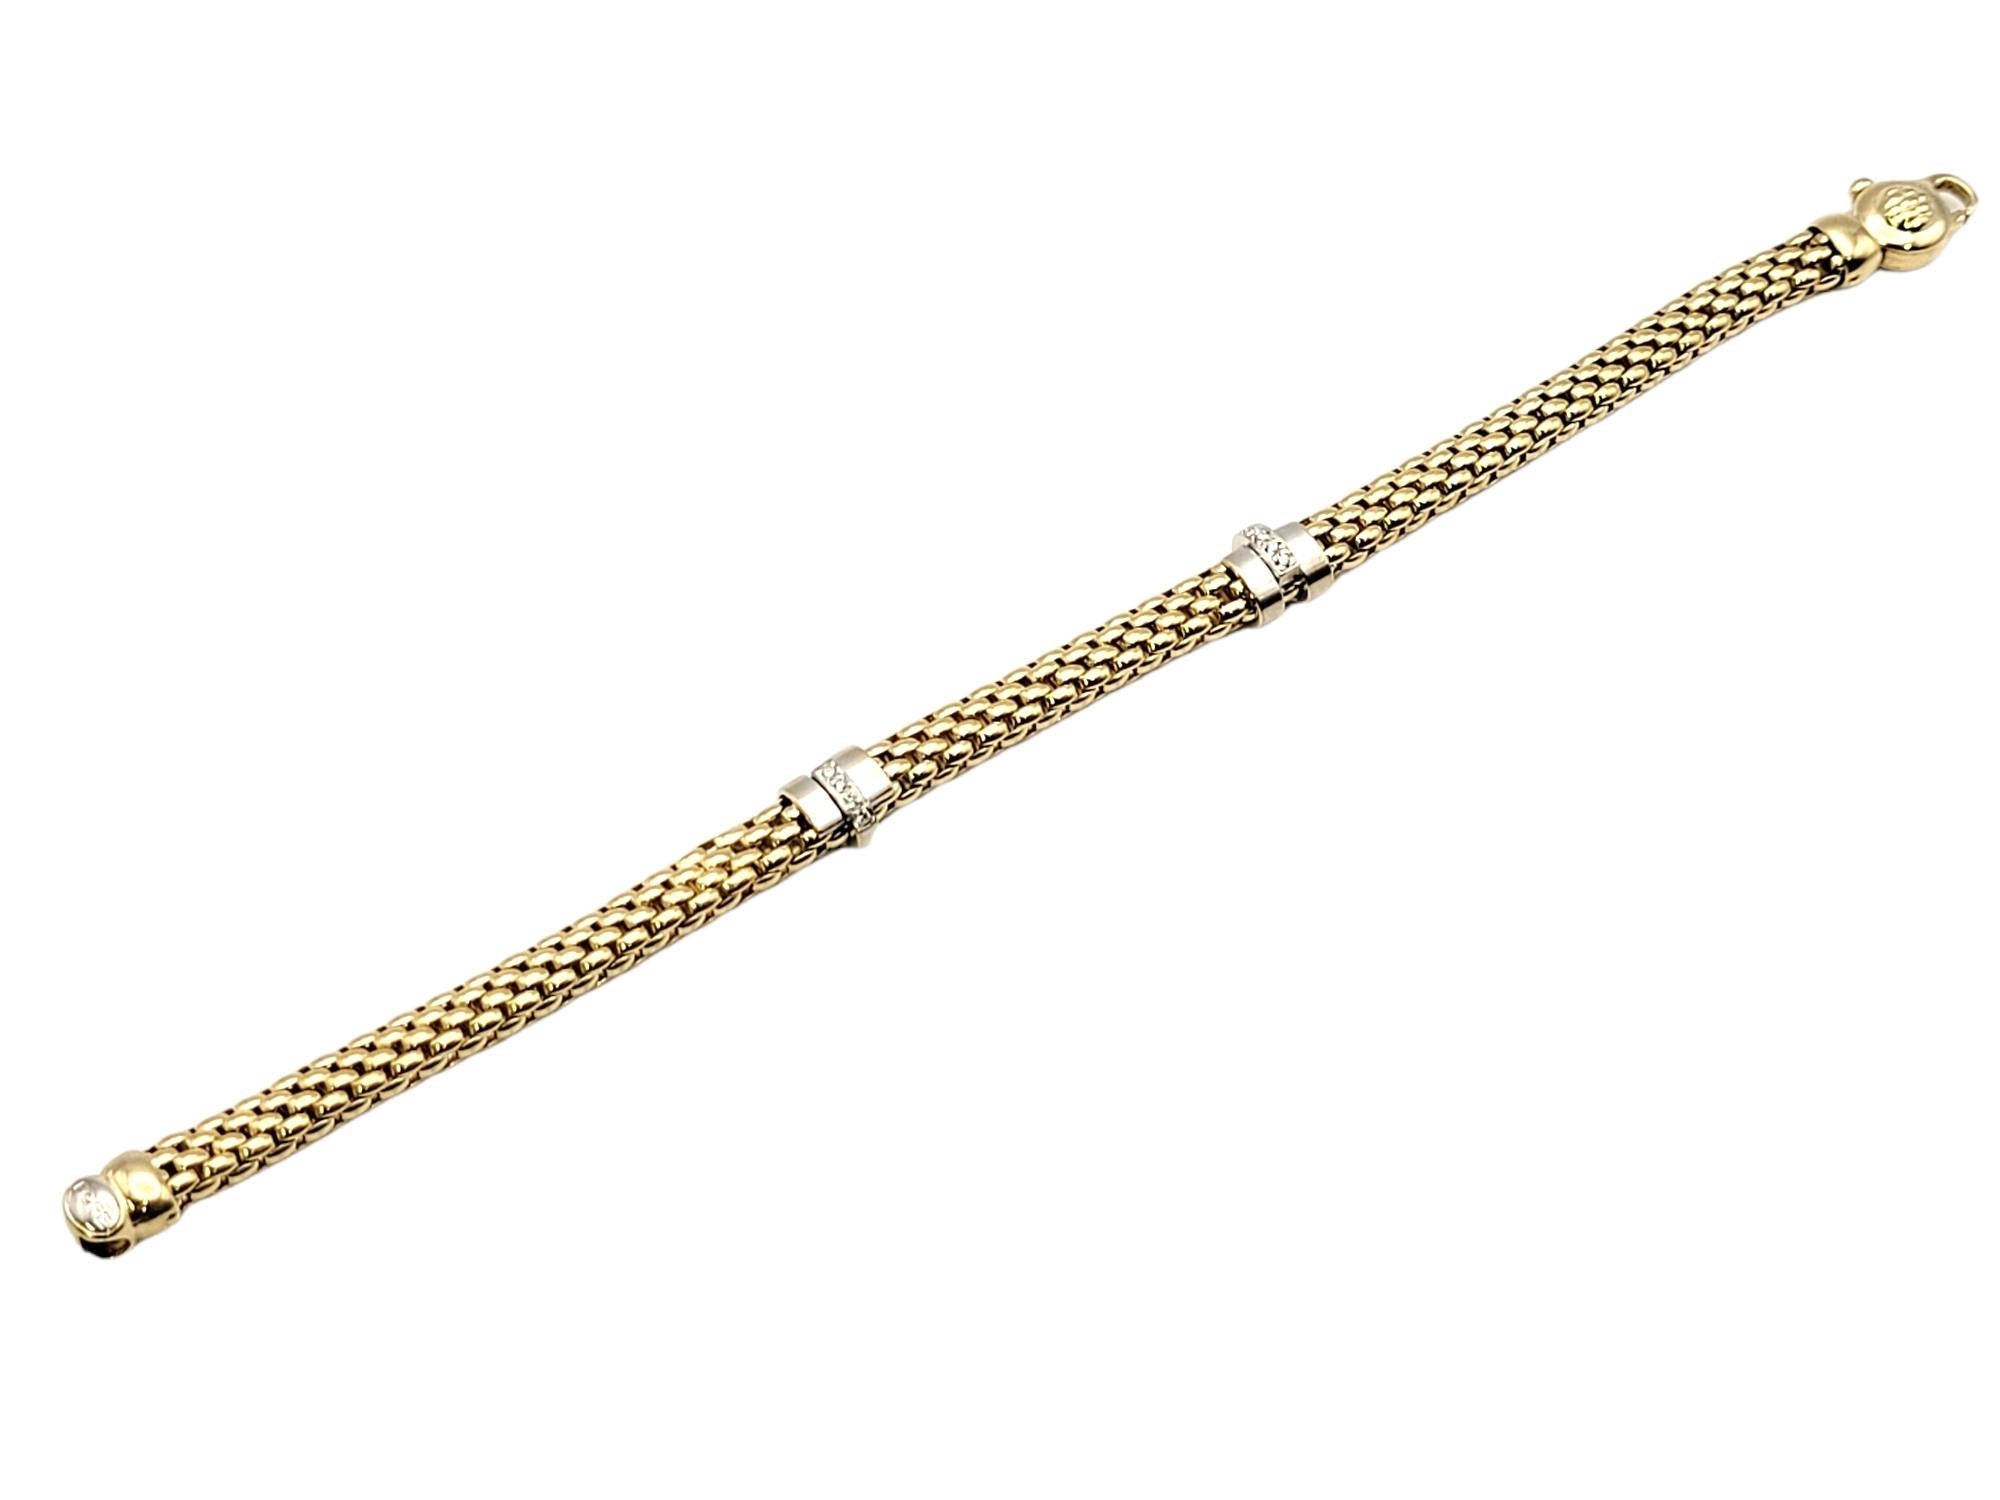 Contemporary FOPE Two Tone 18 Karat Gold Mesh Link Bracelet with Pave Diamond Accents